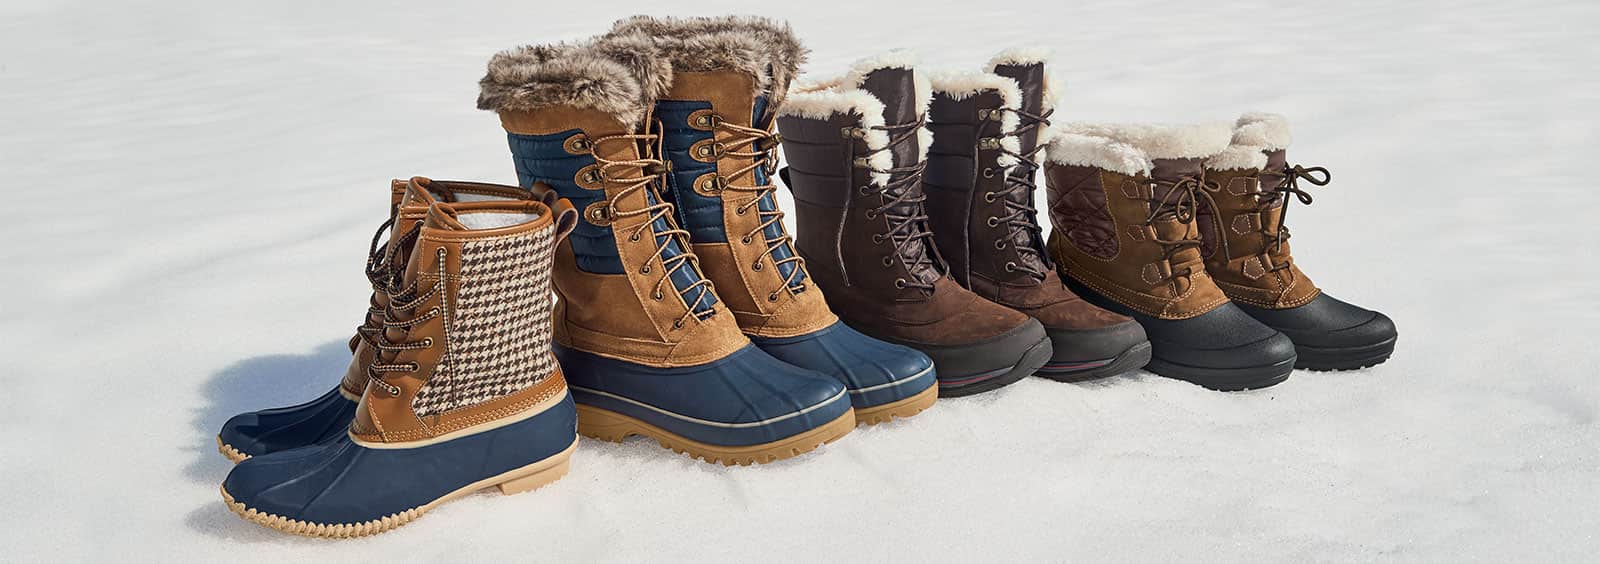 Best Women's Boots to Travel With This Winter | Lands' End